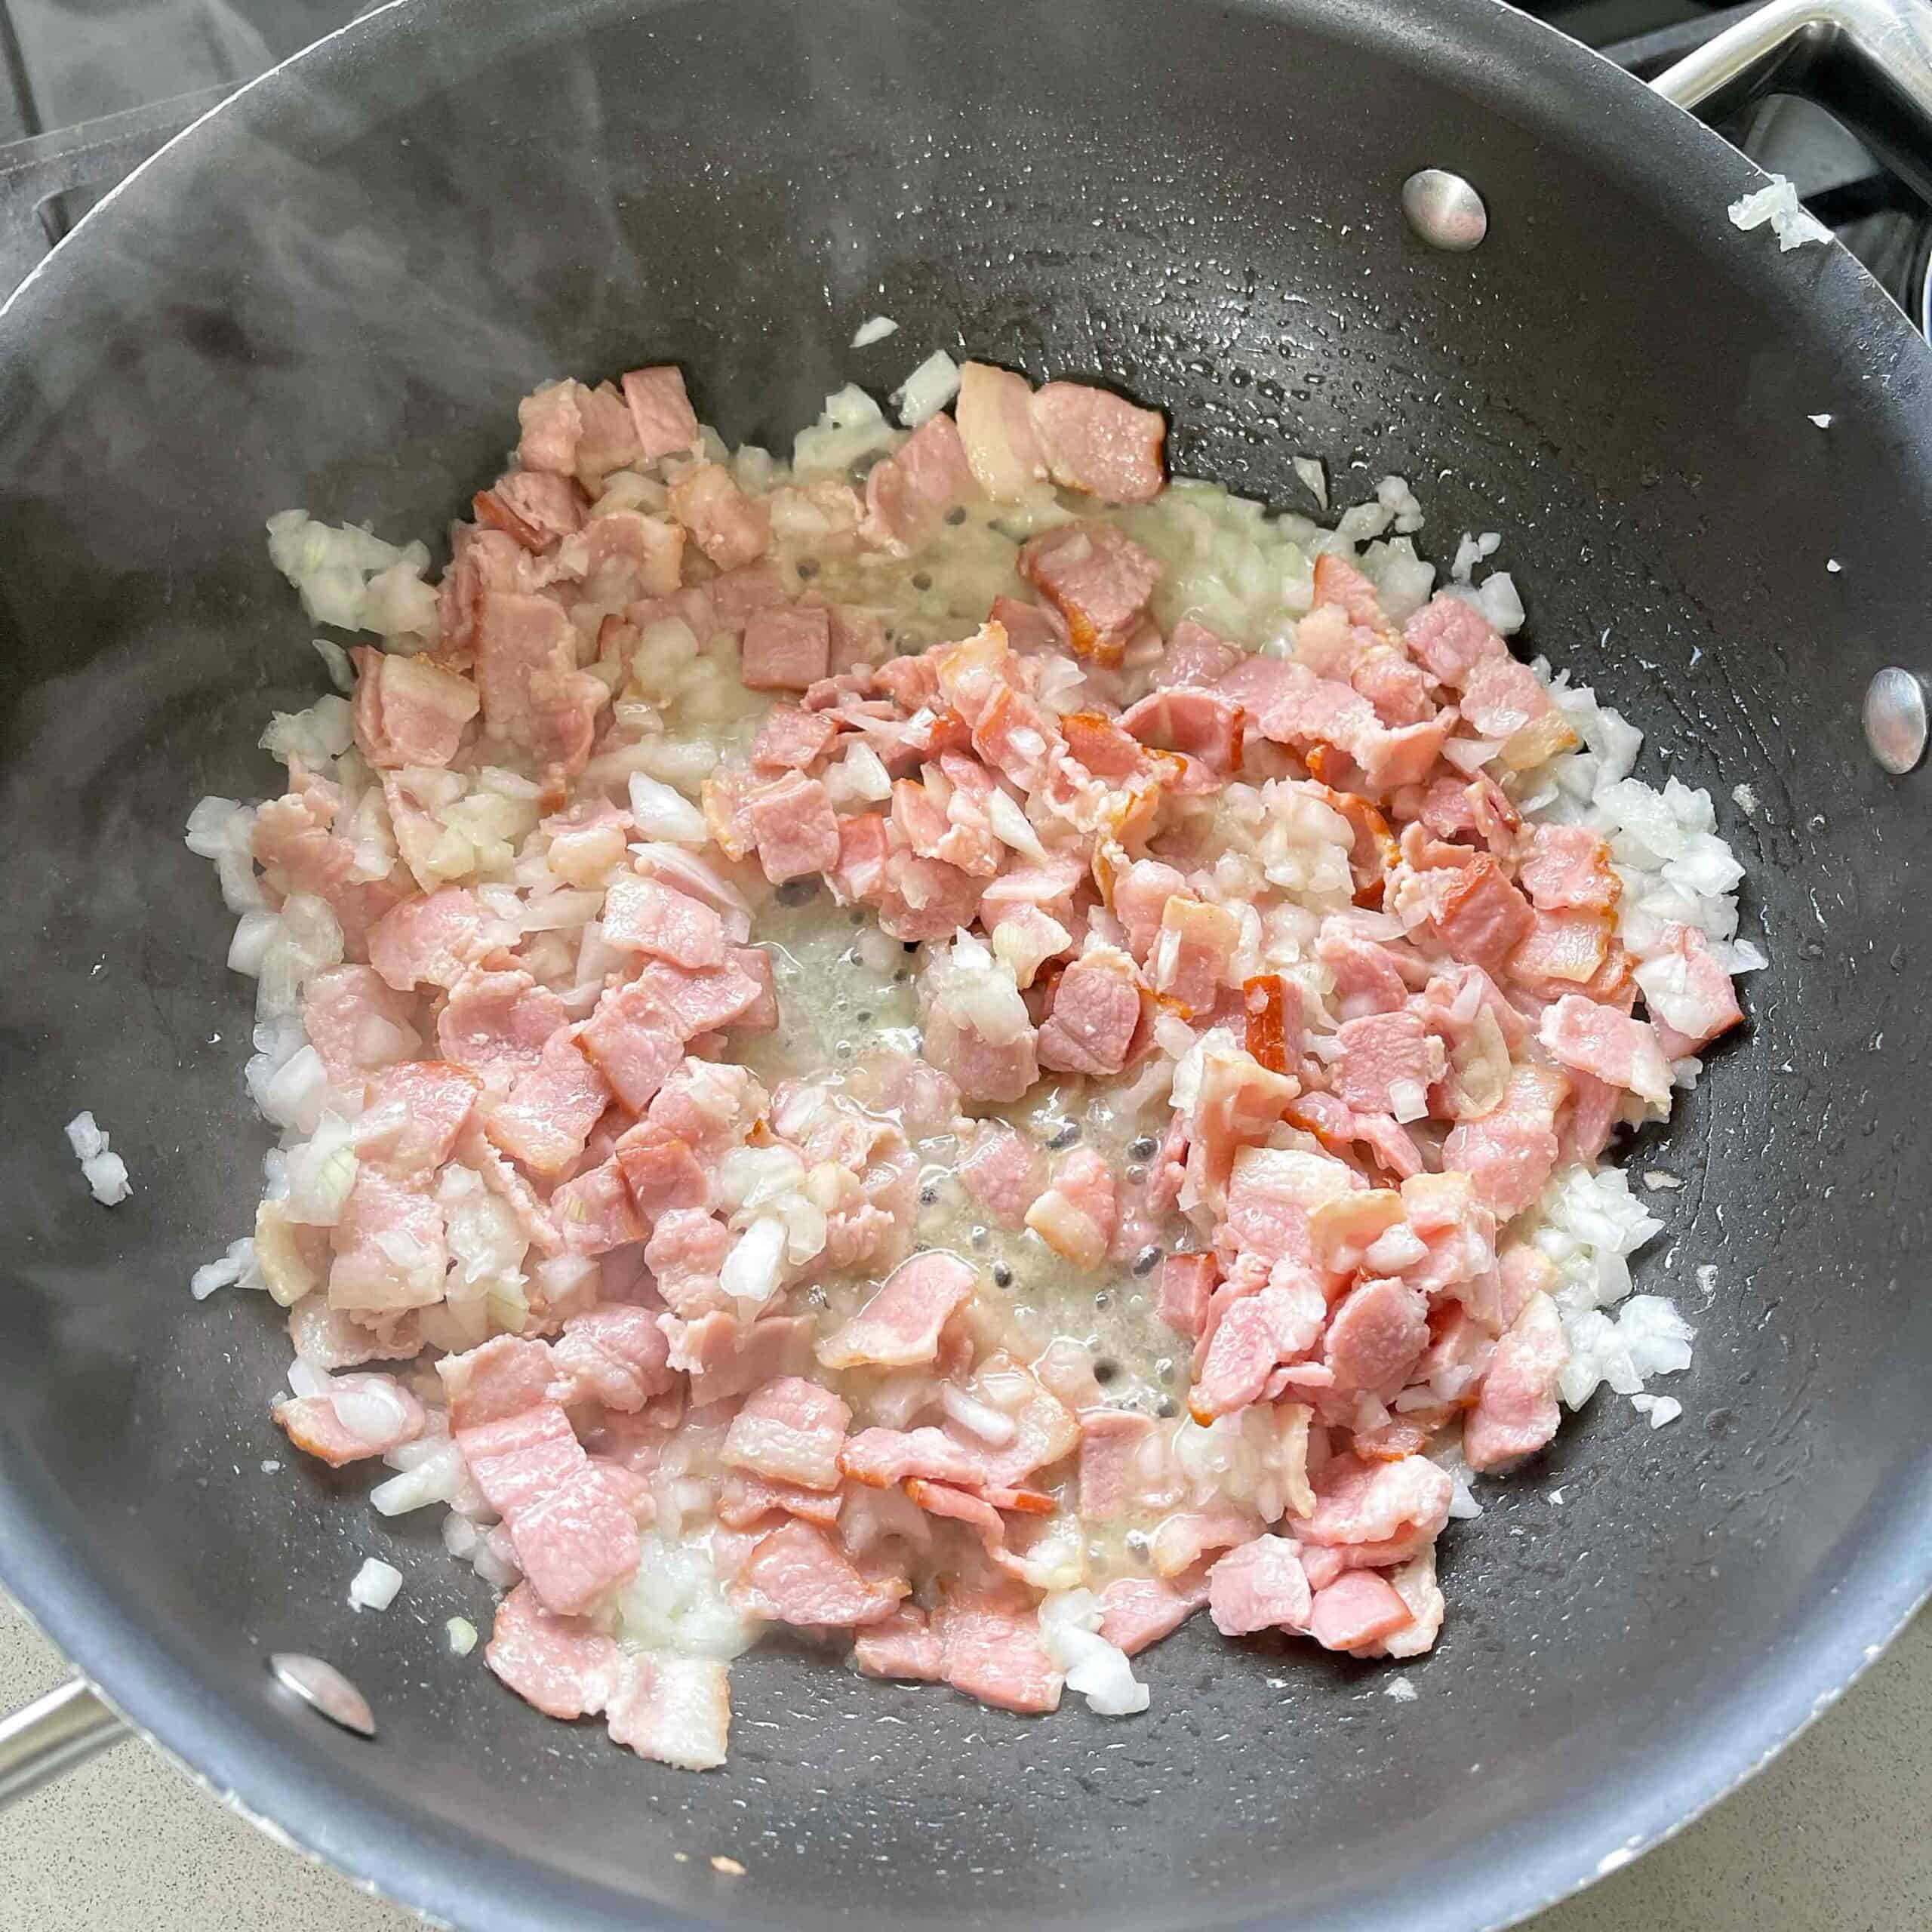 Bacon and onion frying in a large frying pan.